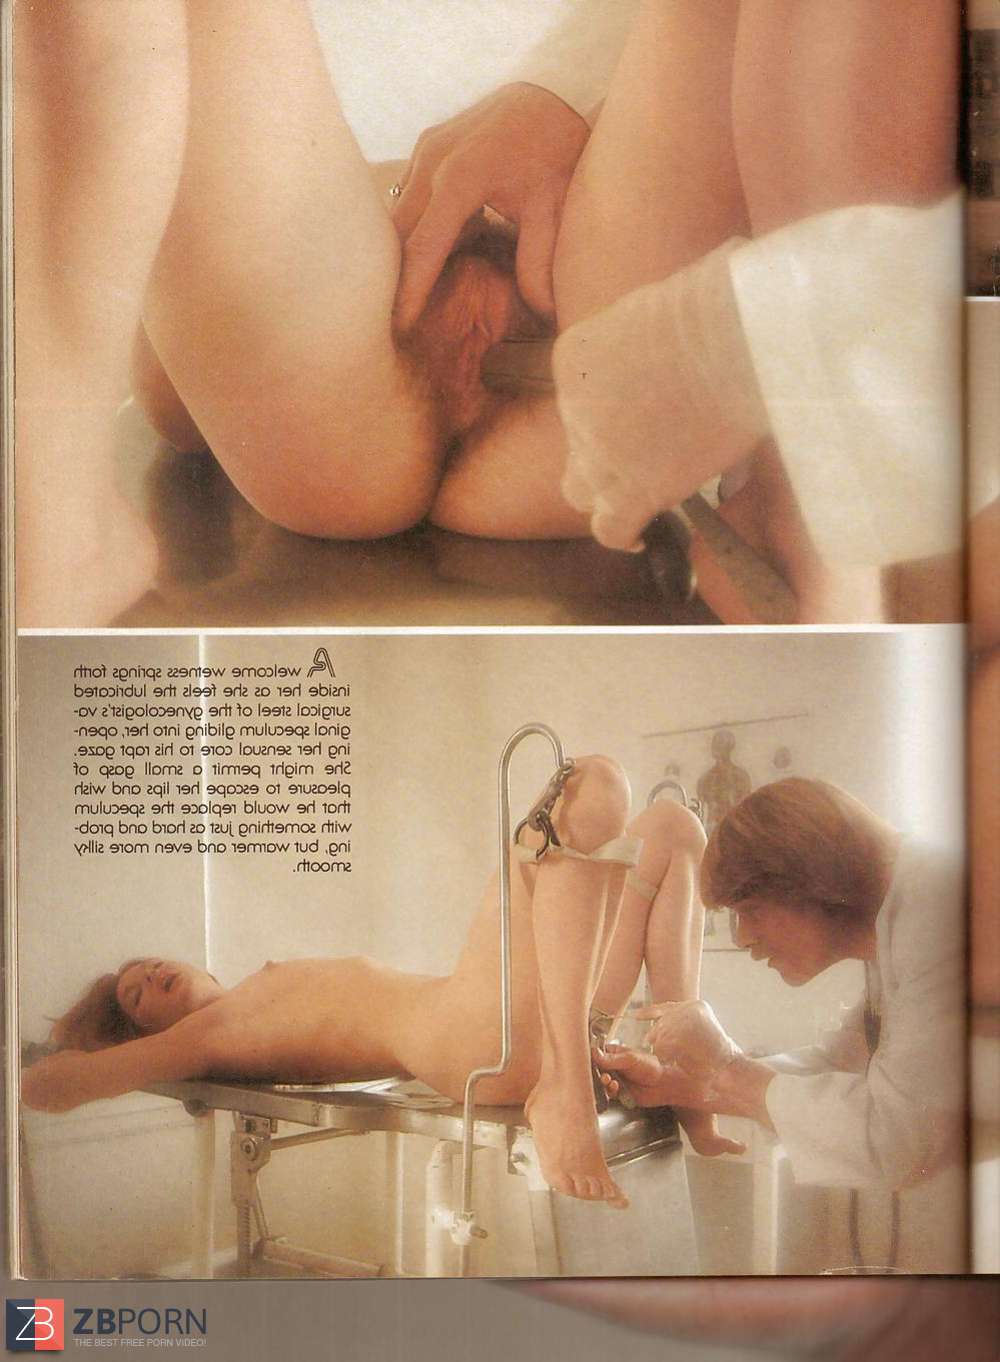 Hustler July 1976 A Day In The Life Of A Gynecologist Zb Porn 6239